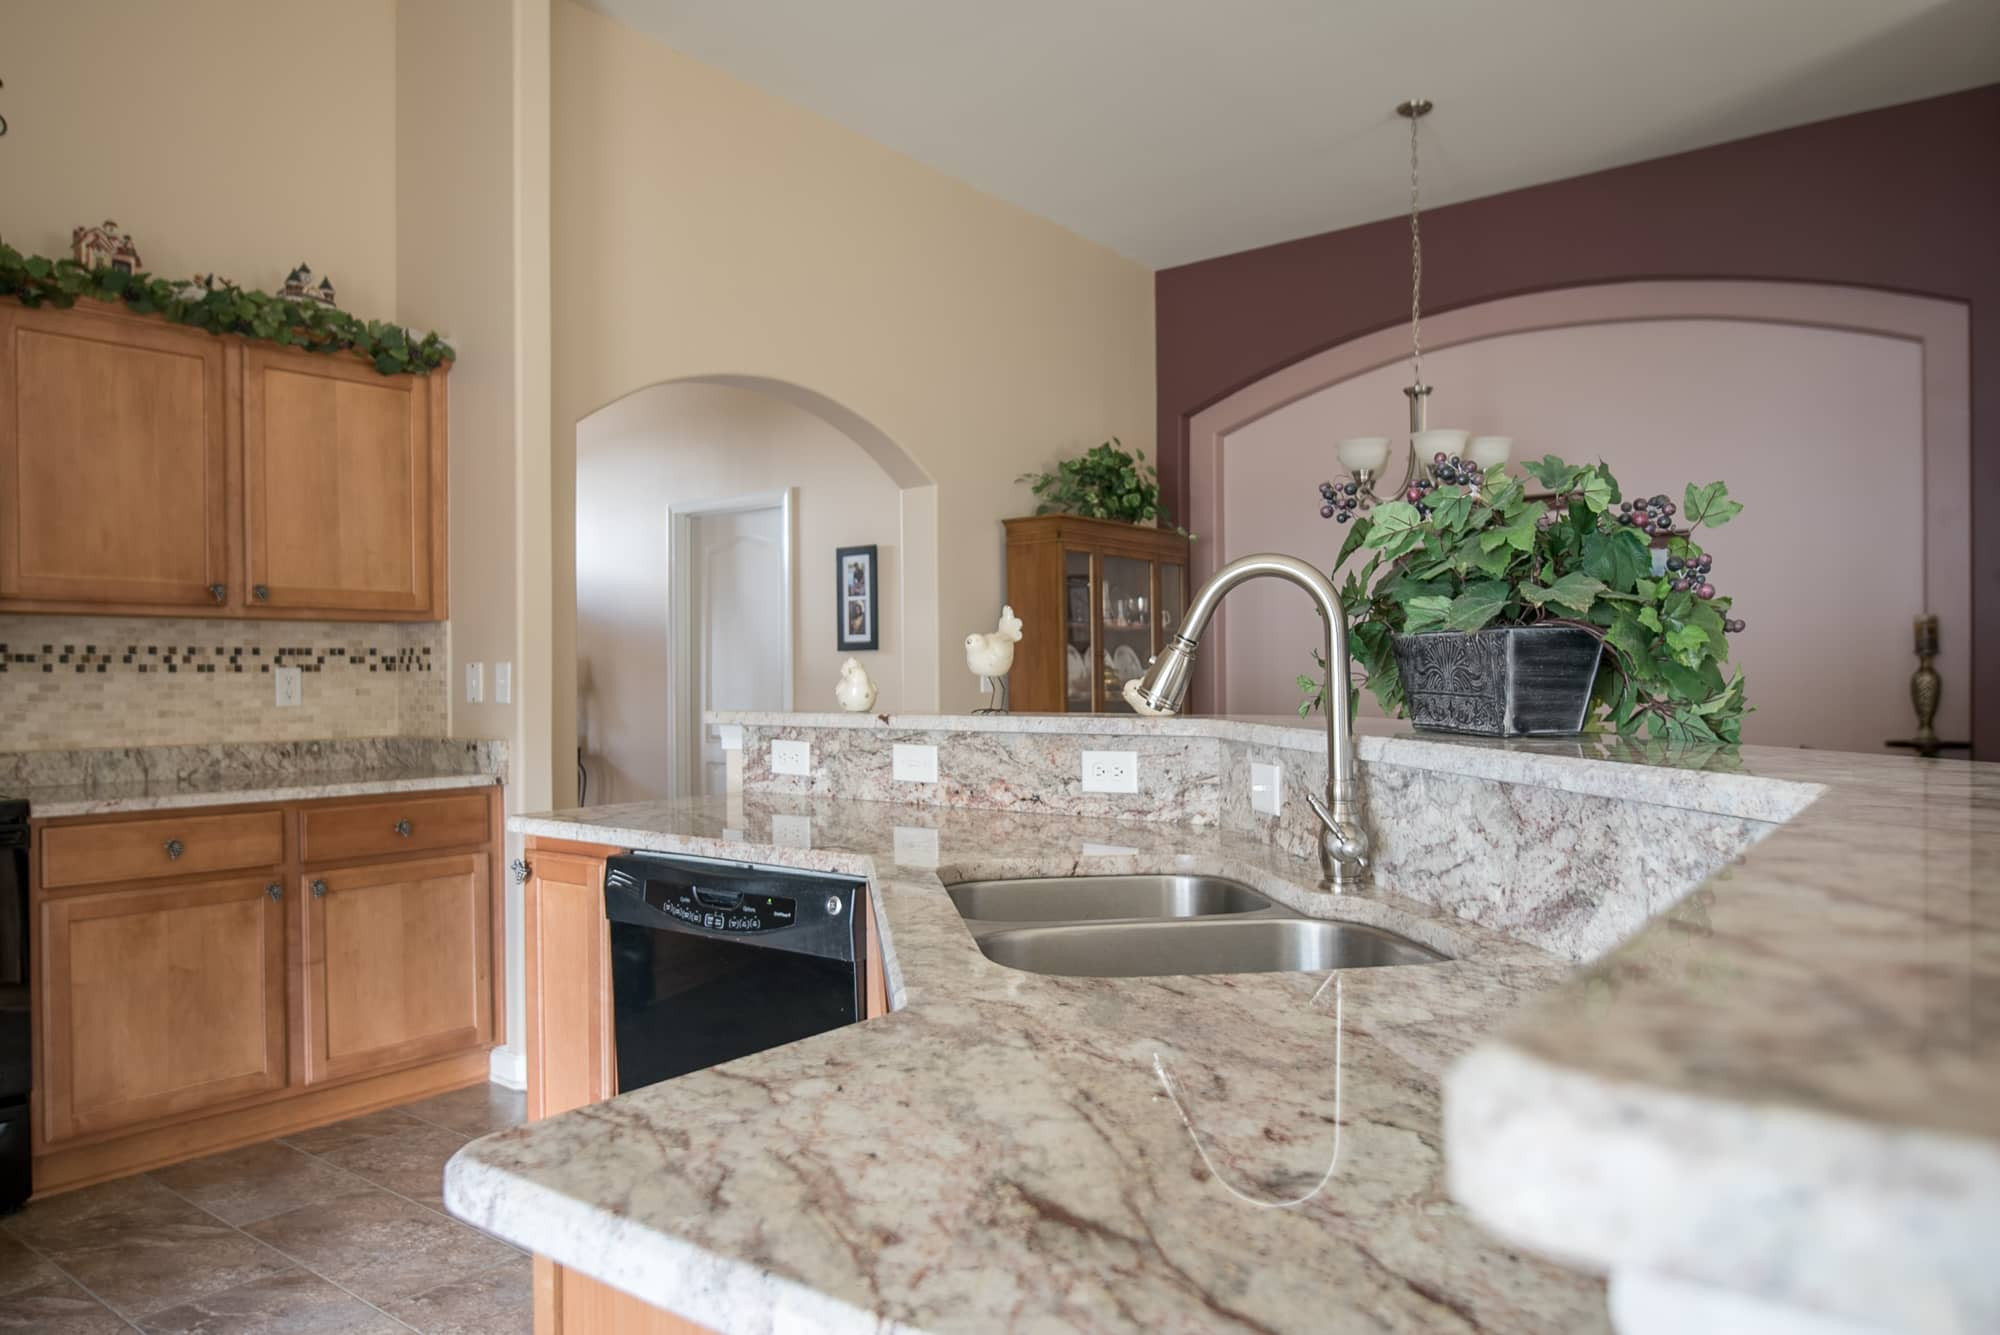 Kitchen Countertops Pictures
 Kitchen Countertop Ideas and Gallery